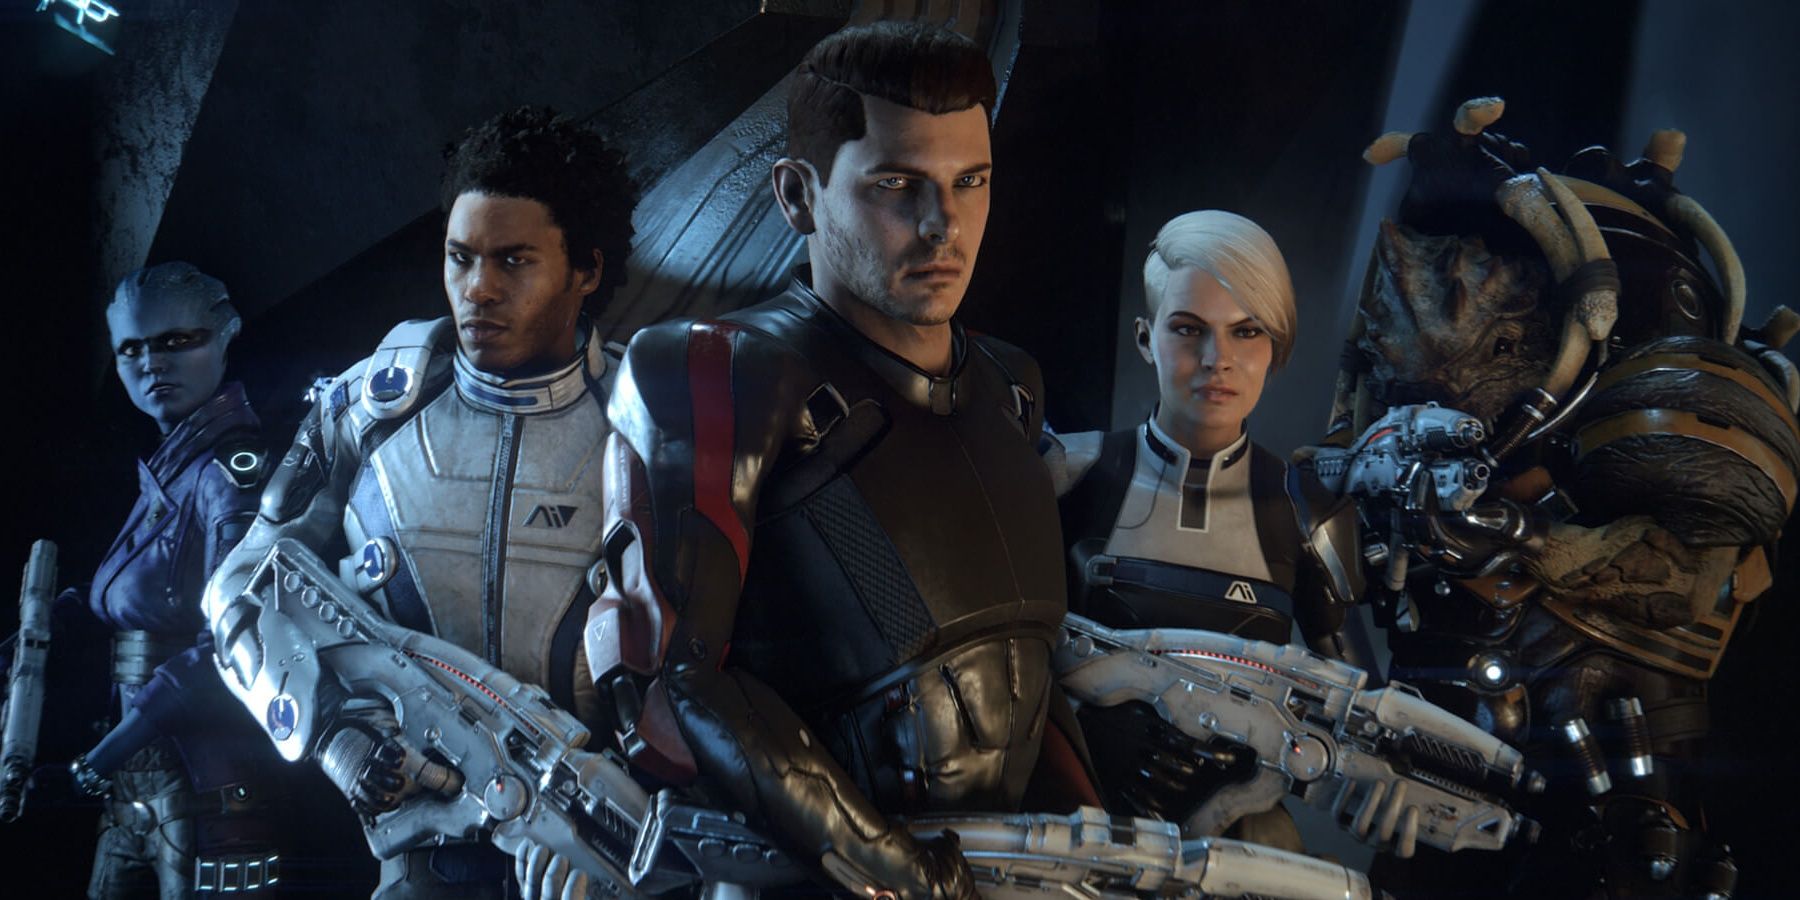 Mass Effect: Andromeda's crew may make contact with The Milky Way